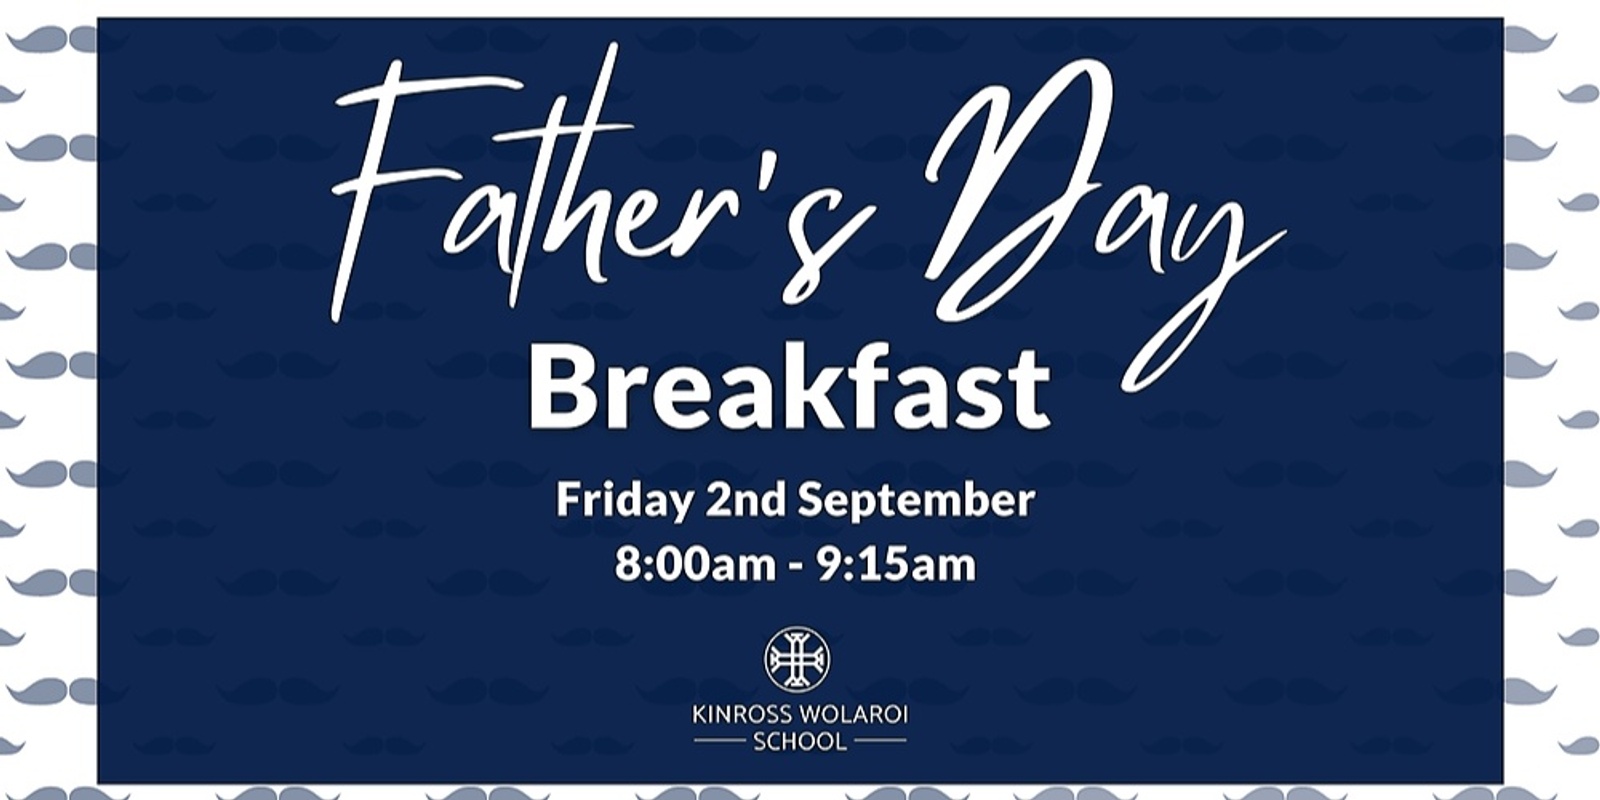 Banner image for Father's Day Breakfast